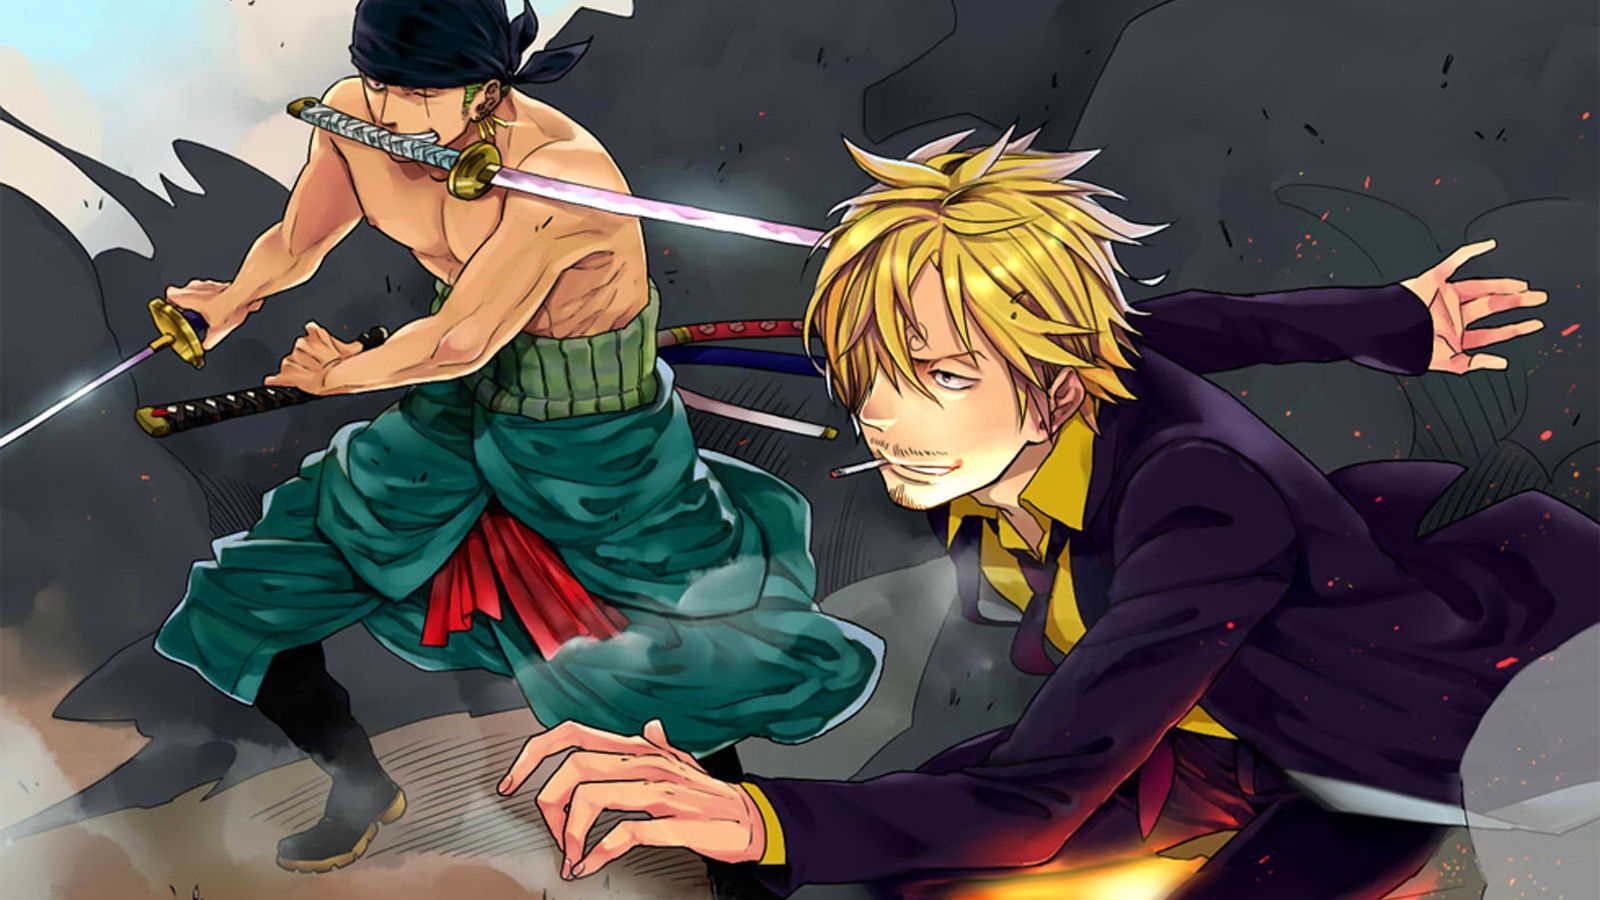 Zoro X Sanji Wallpapers Wallpaper Cave He is the fifth member of the crew and the fourth to join, doing so at the end of the baratie arc. zoro x sanji wallpapers wallpaper cave